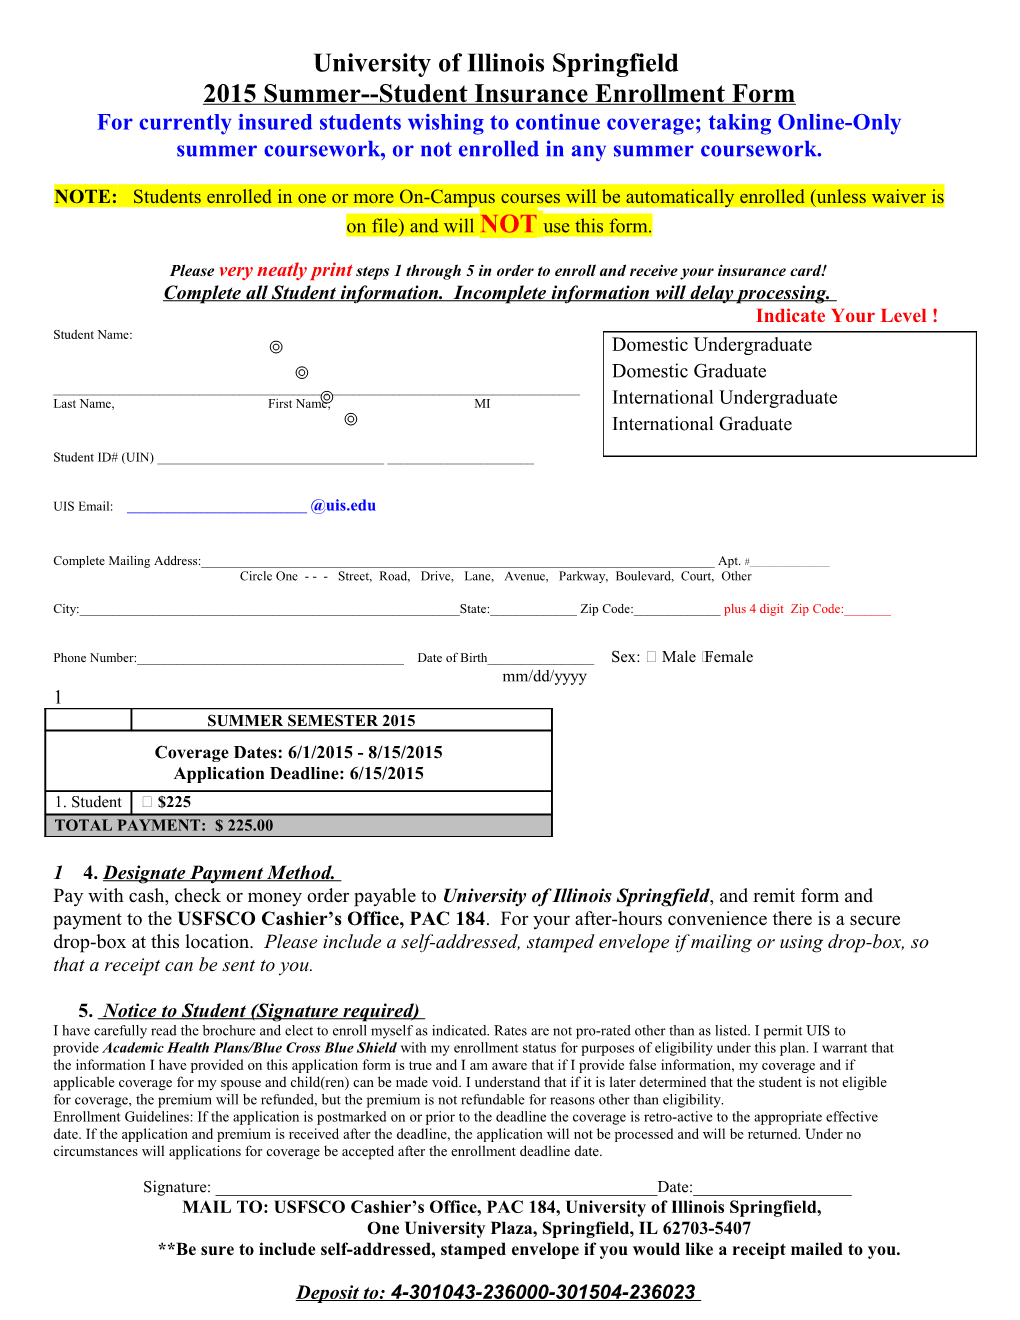 University of Illinois at Springfield 2006 Summer Enrollment Form in Order to Enroll You